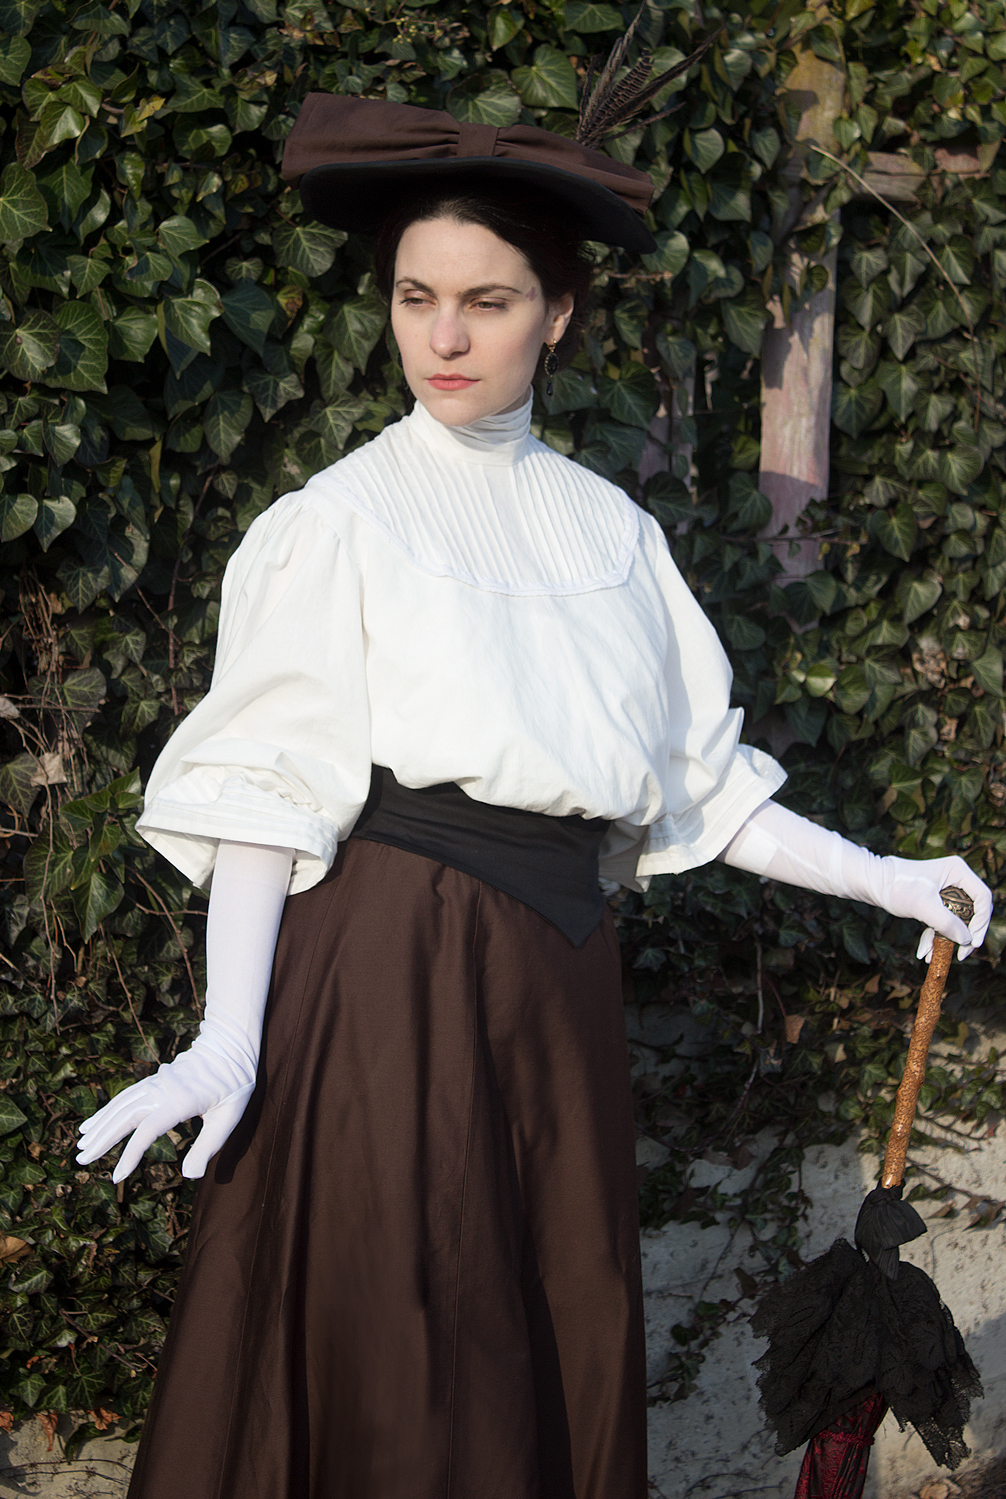 Edwardian jumper dress and tucked blouse (1900-1905)